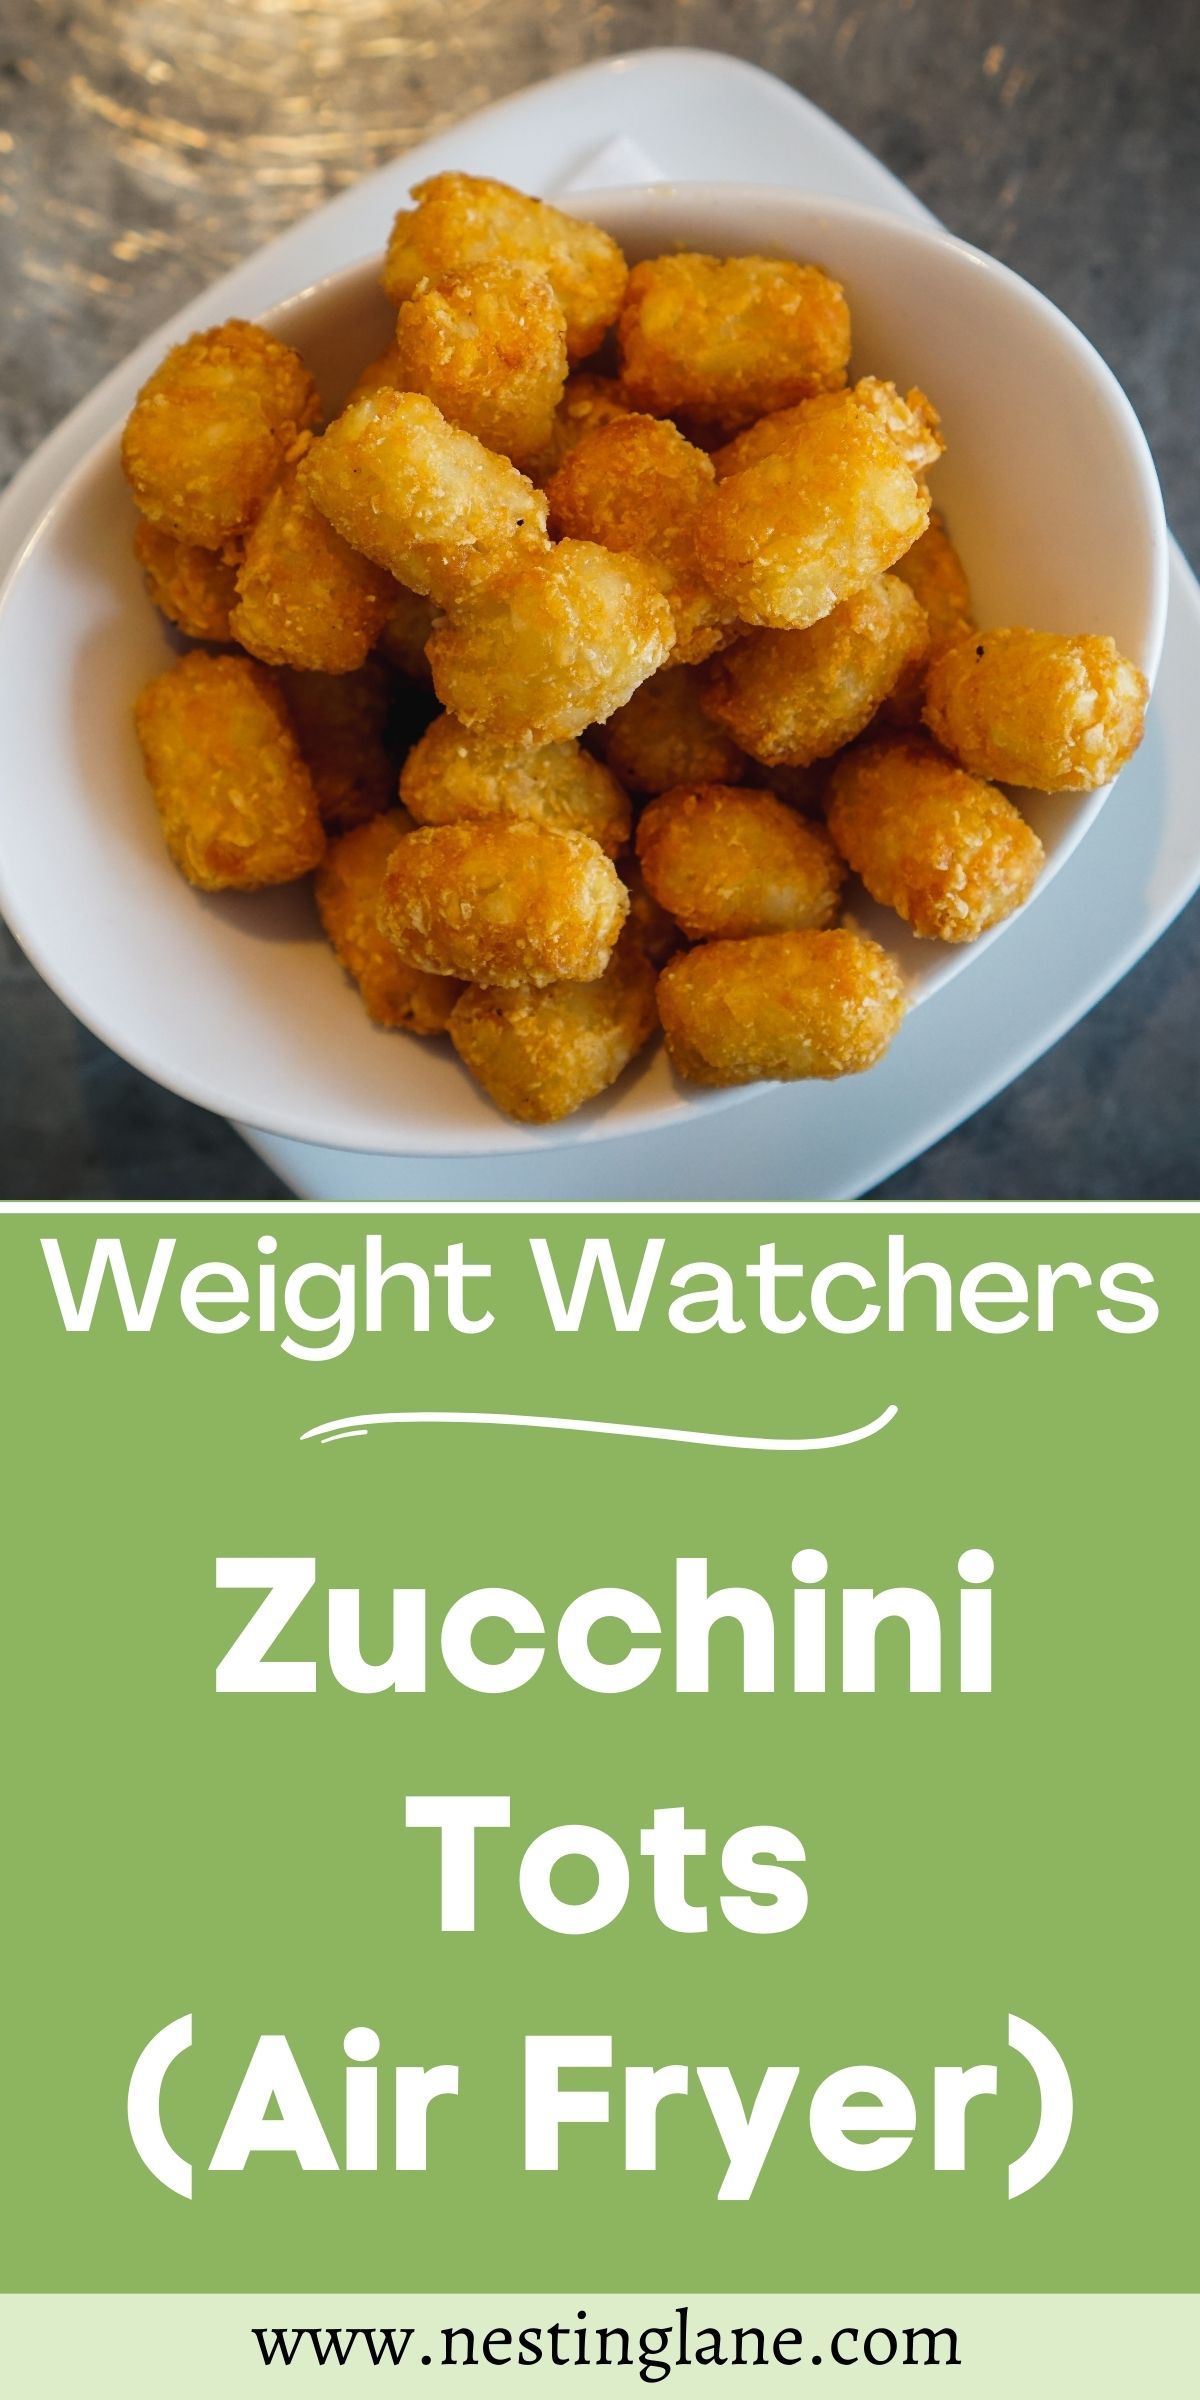 Graphic for Pinterest of Weight Watchers Air Fryer Zucchini Tots Recipe.